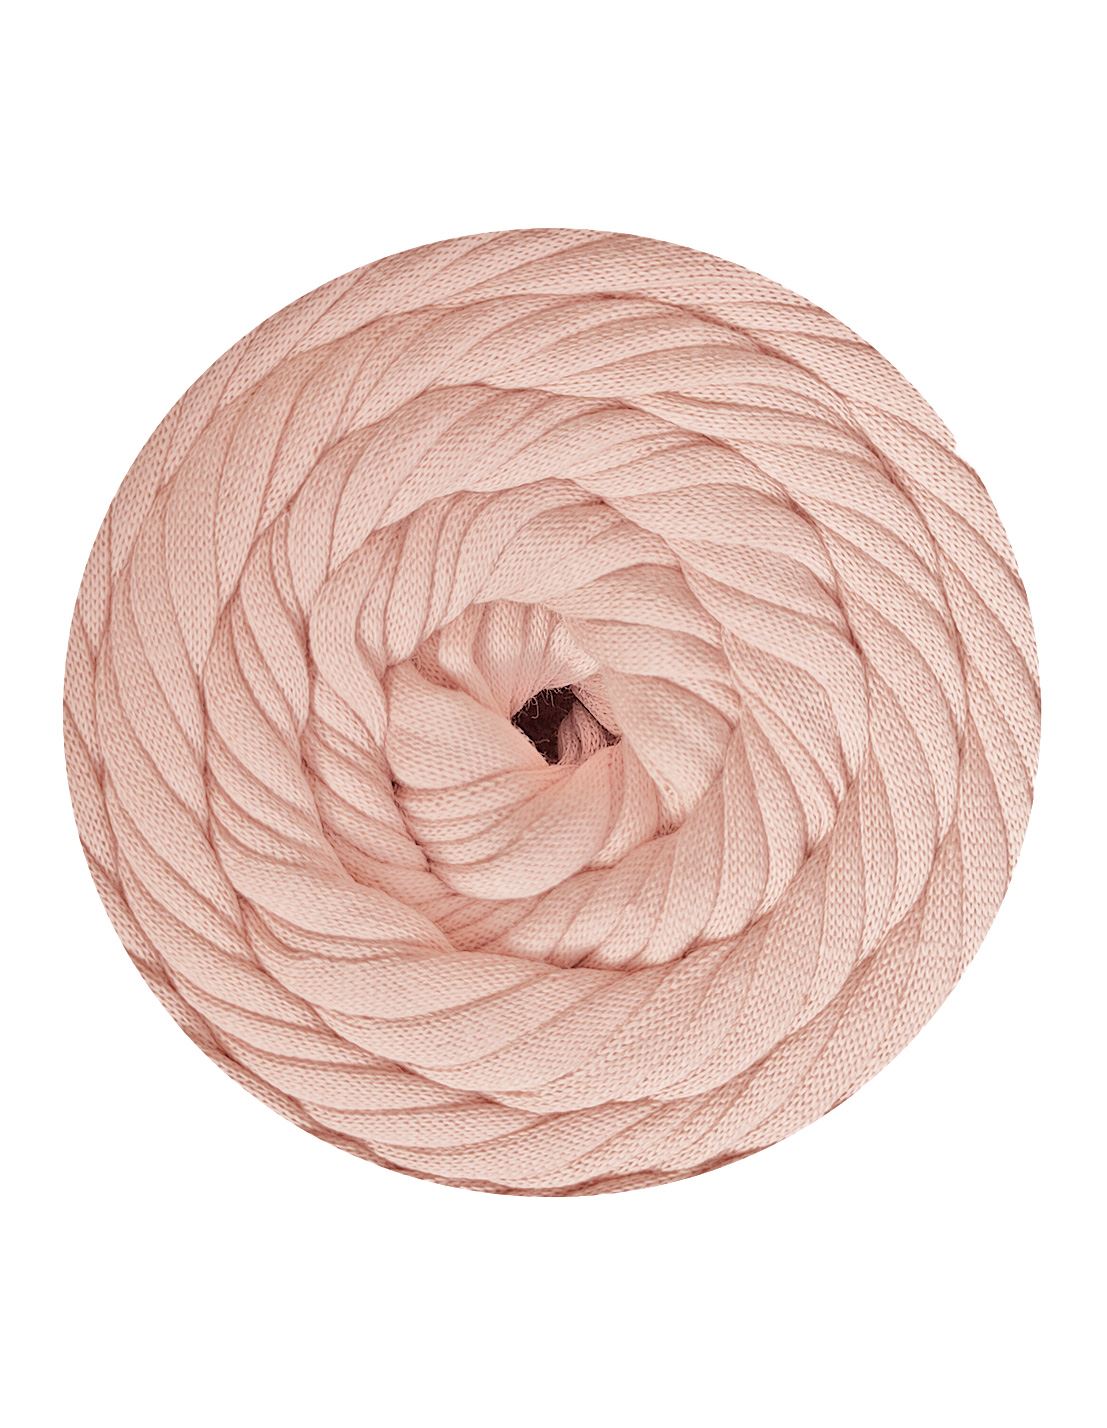 Vintage Pink Jersey Be Good t-shirt yarn by Wool and the Gang (500g)